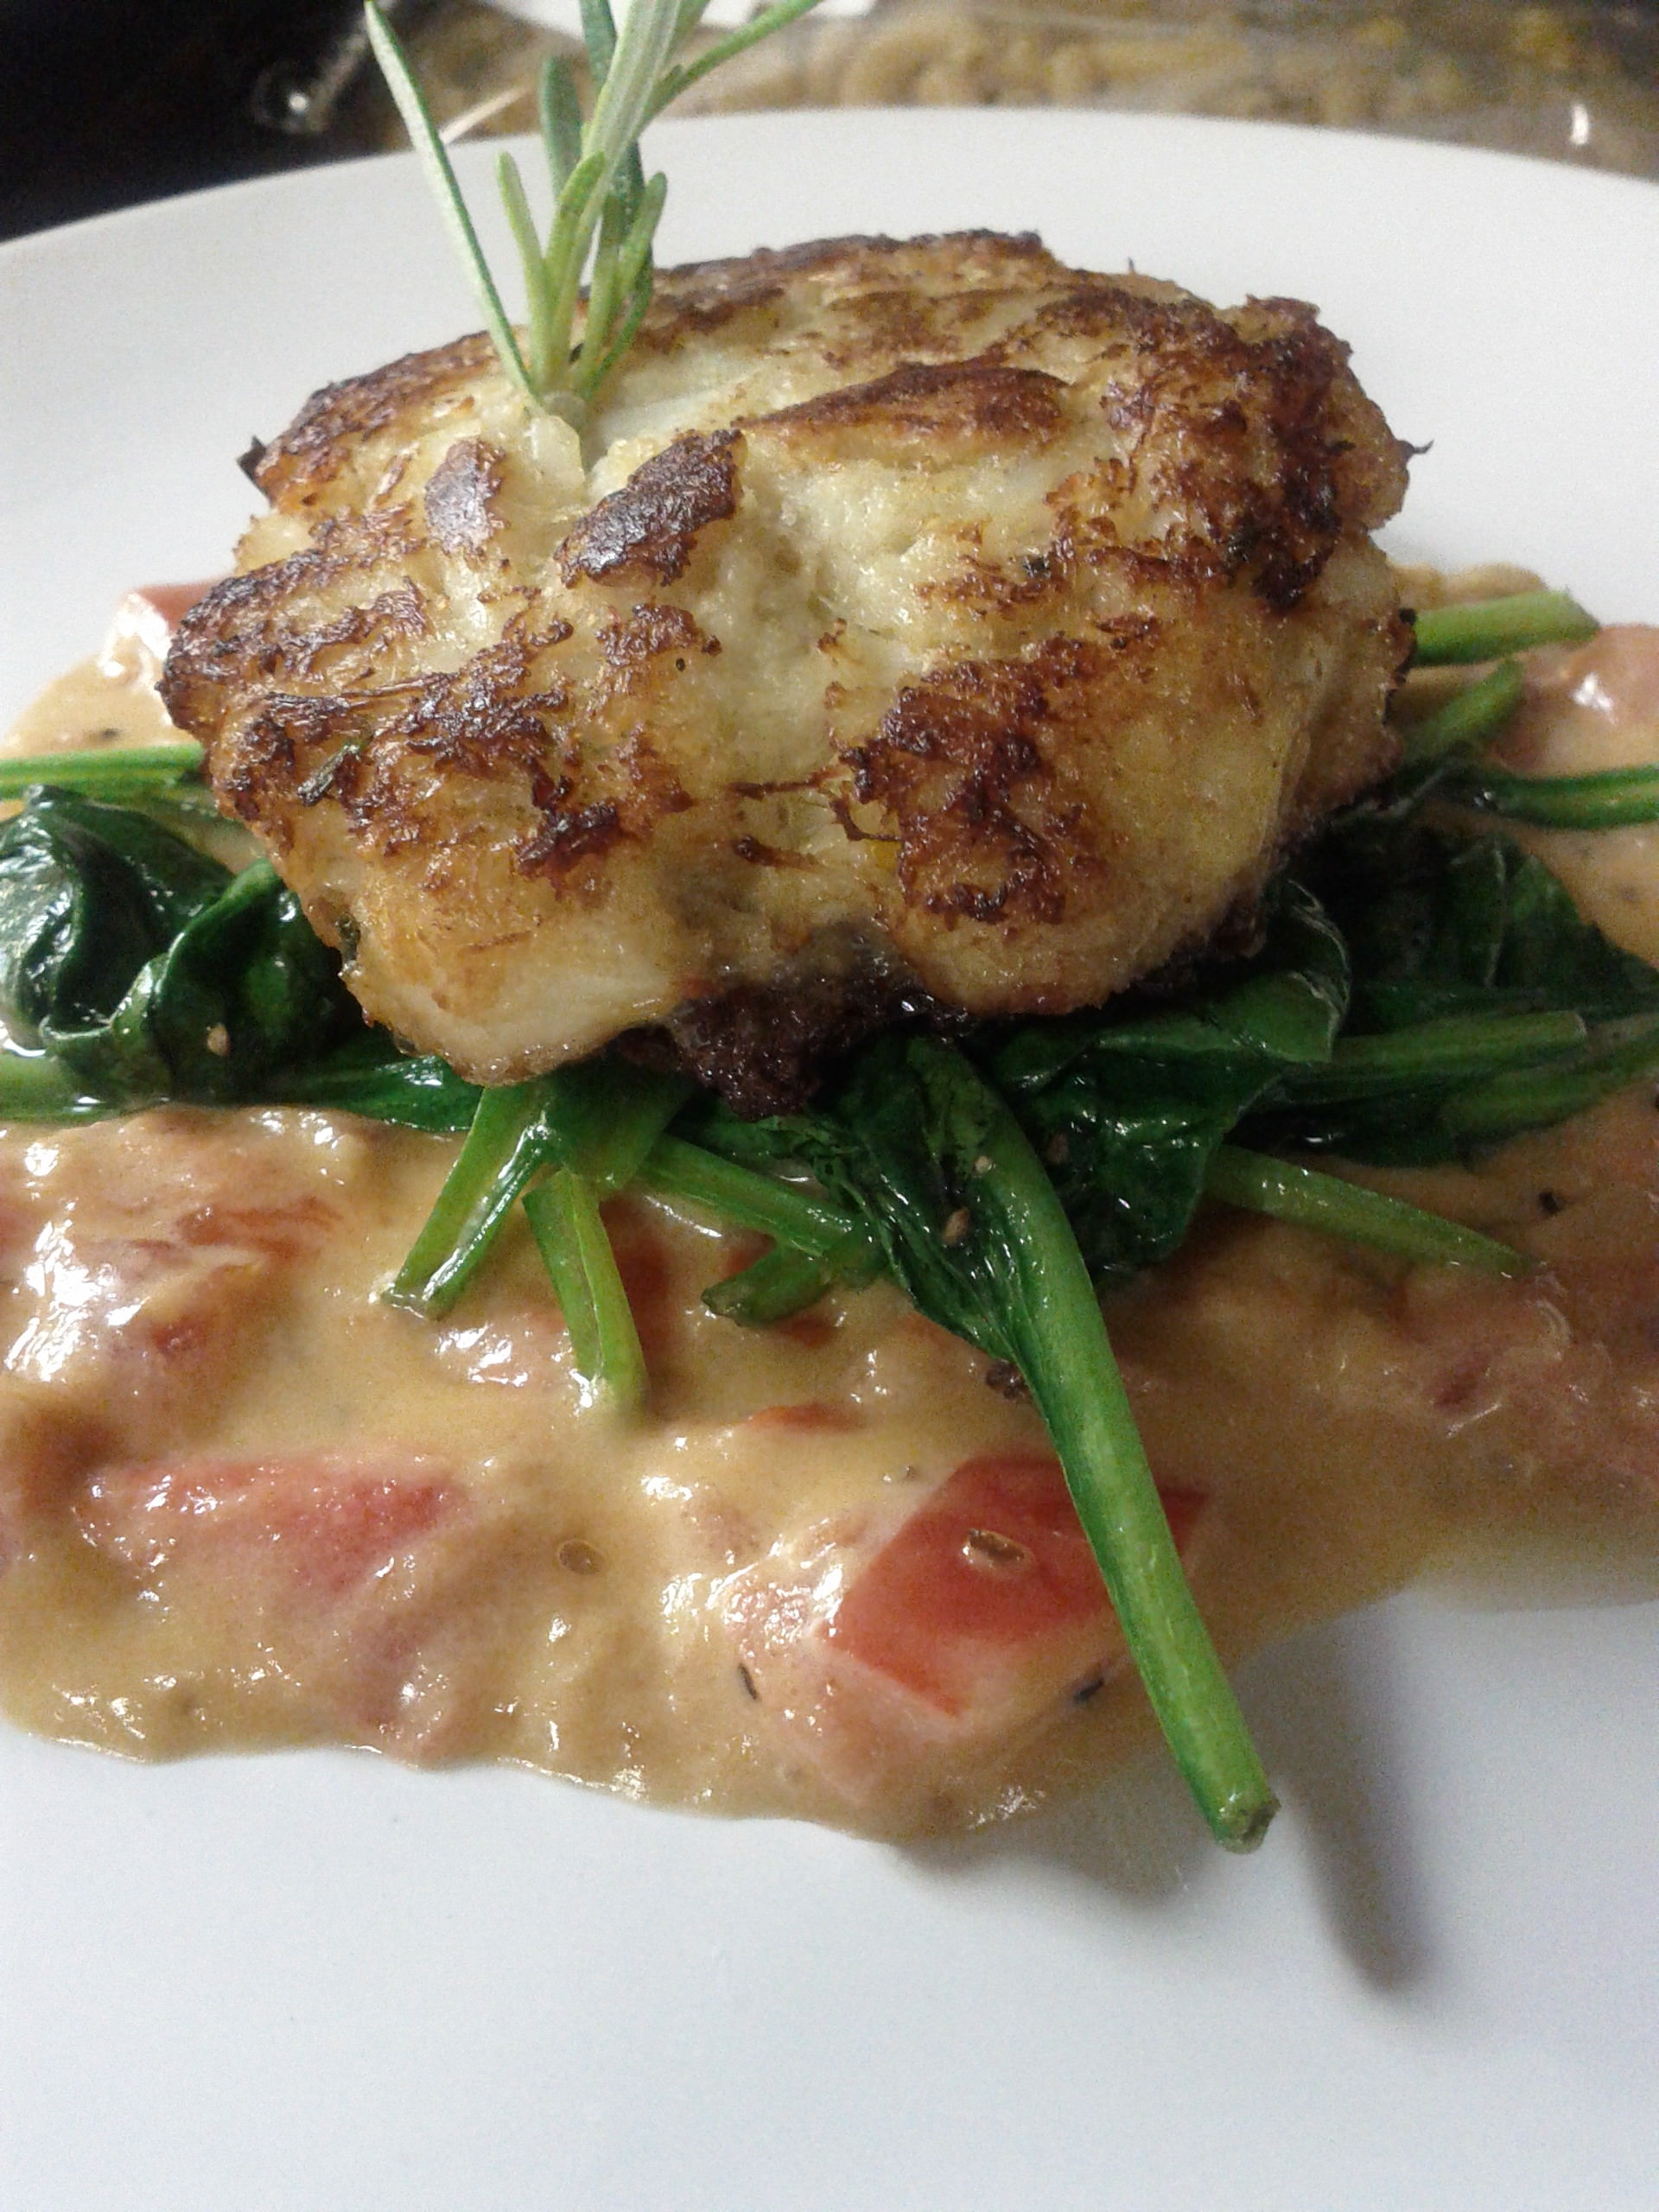 Pan seared crab cake with garlic wilted spinach and tomato / white wine pan sauce